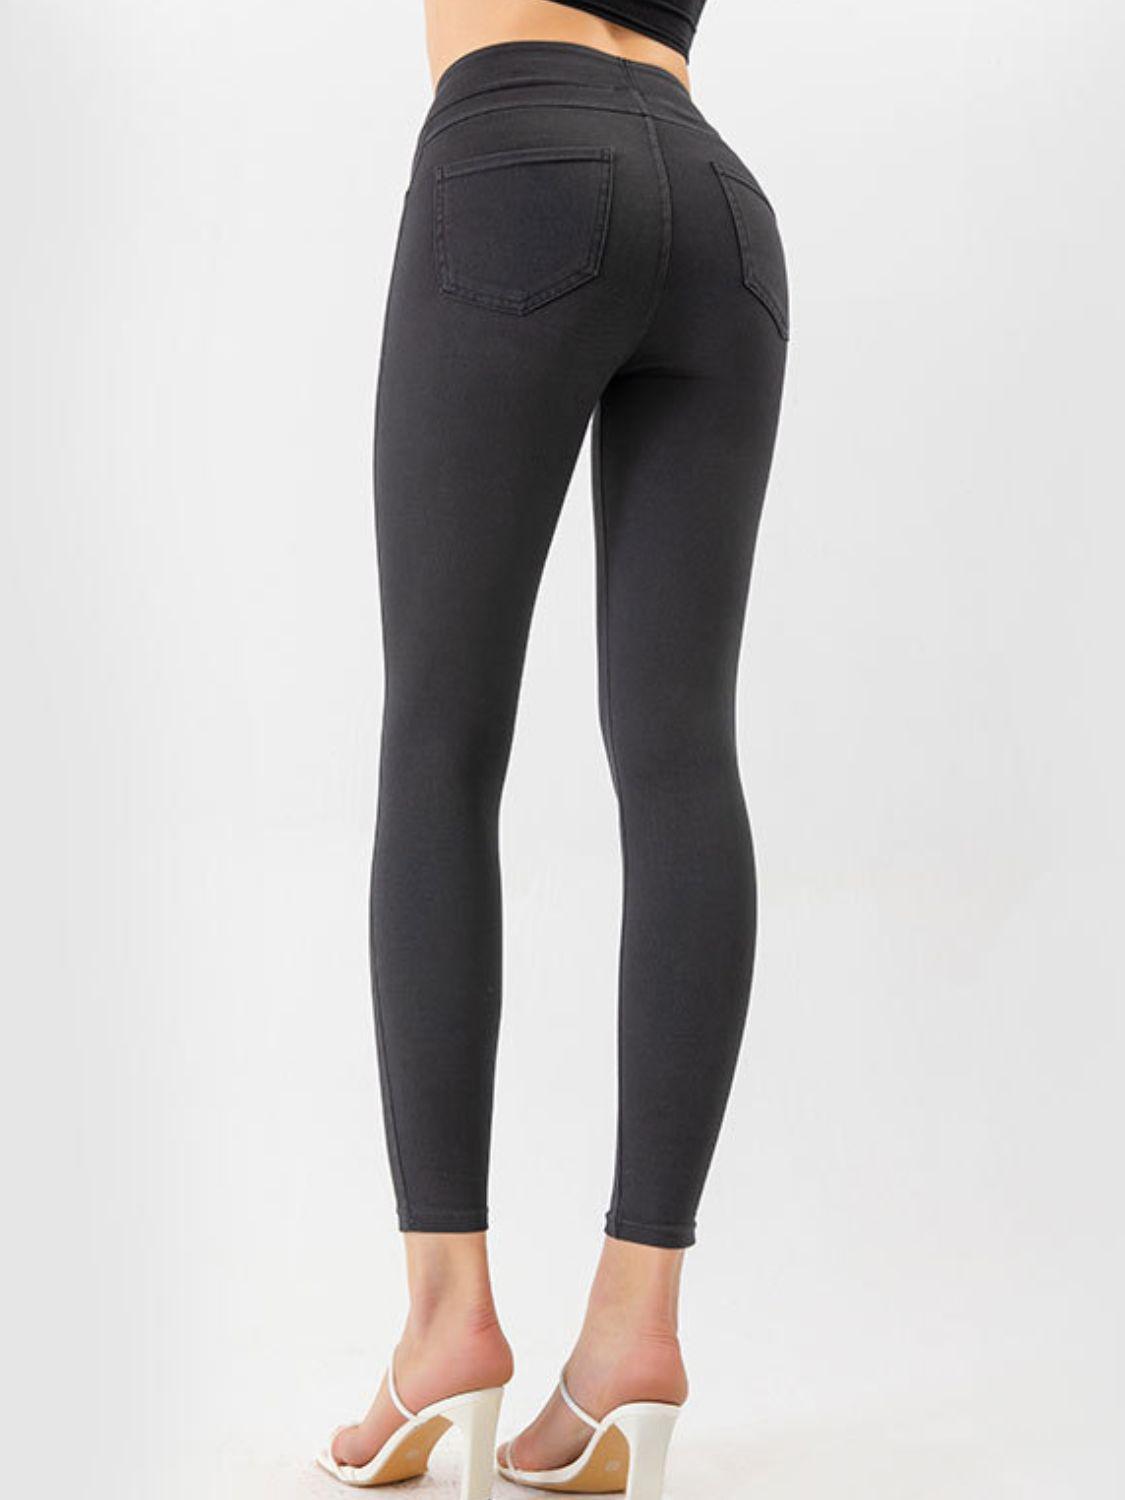 Stand Firm High Rise Skinny Crop Jeans - MXSTUDIO.COM